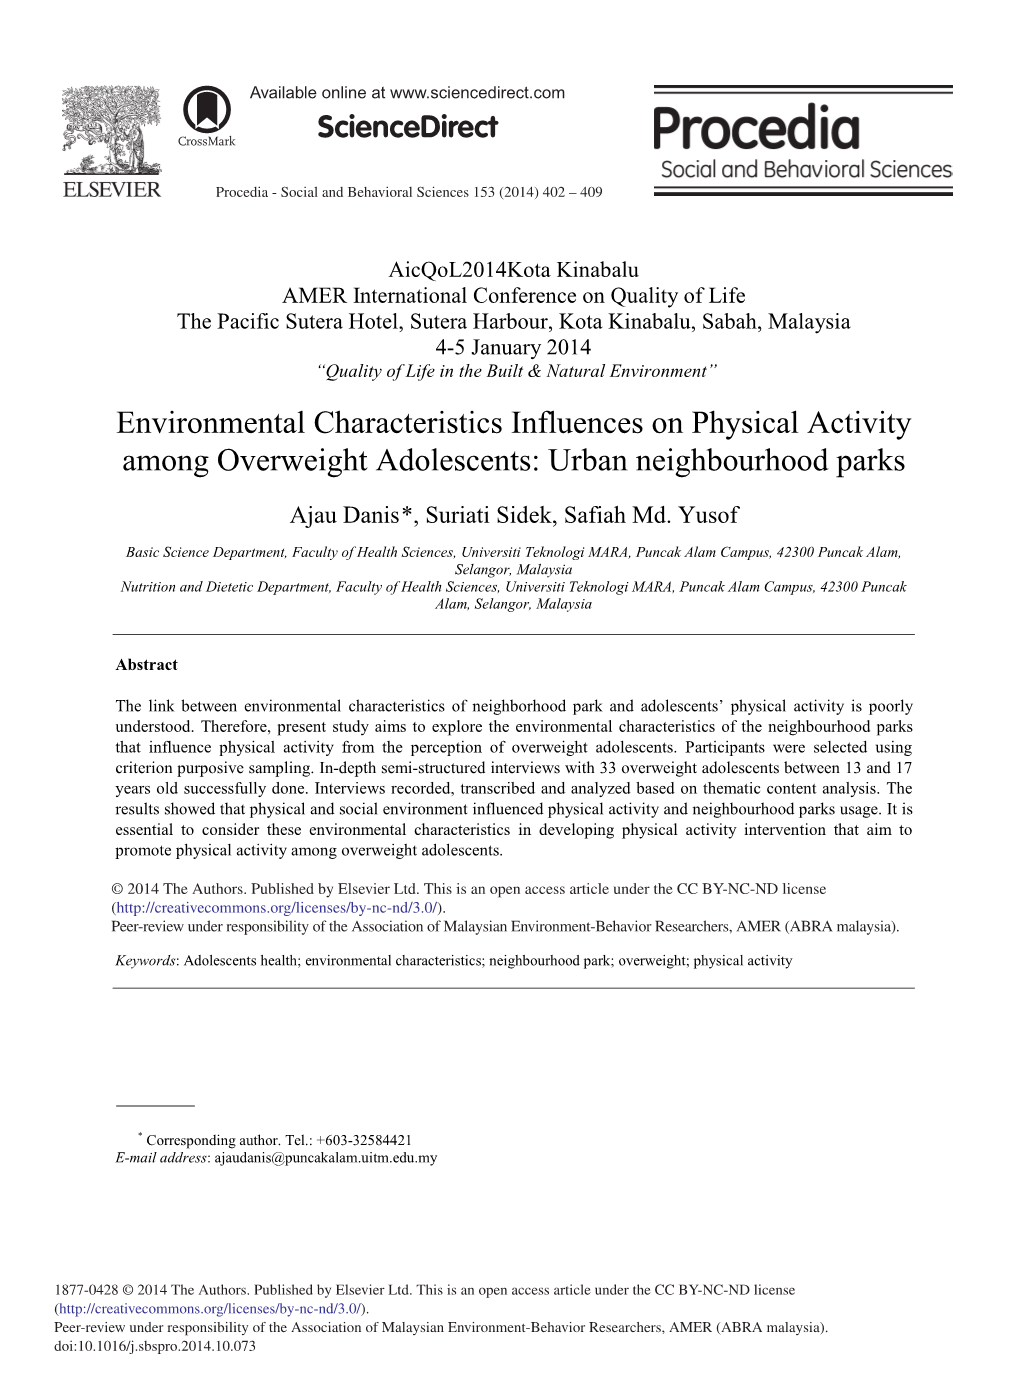 Environmental Characteristics Influences on Physical Activity Among Overweight Adolescents: Urban Neighbourhood Parks